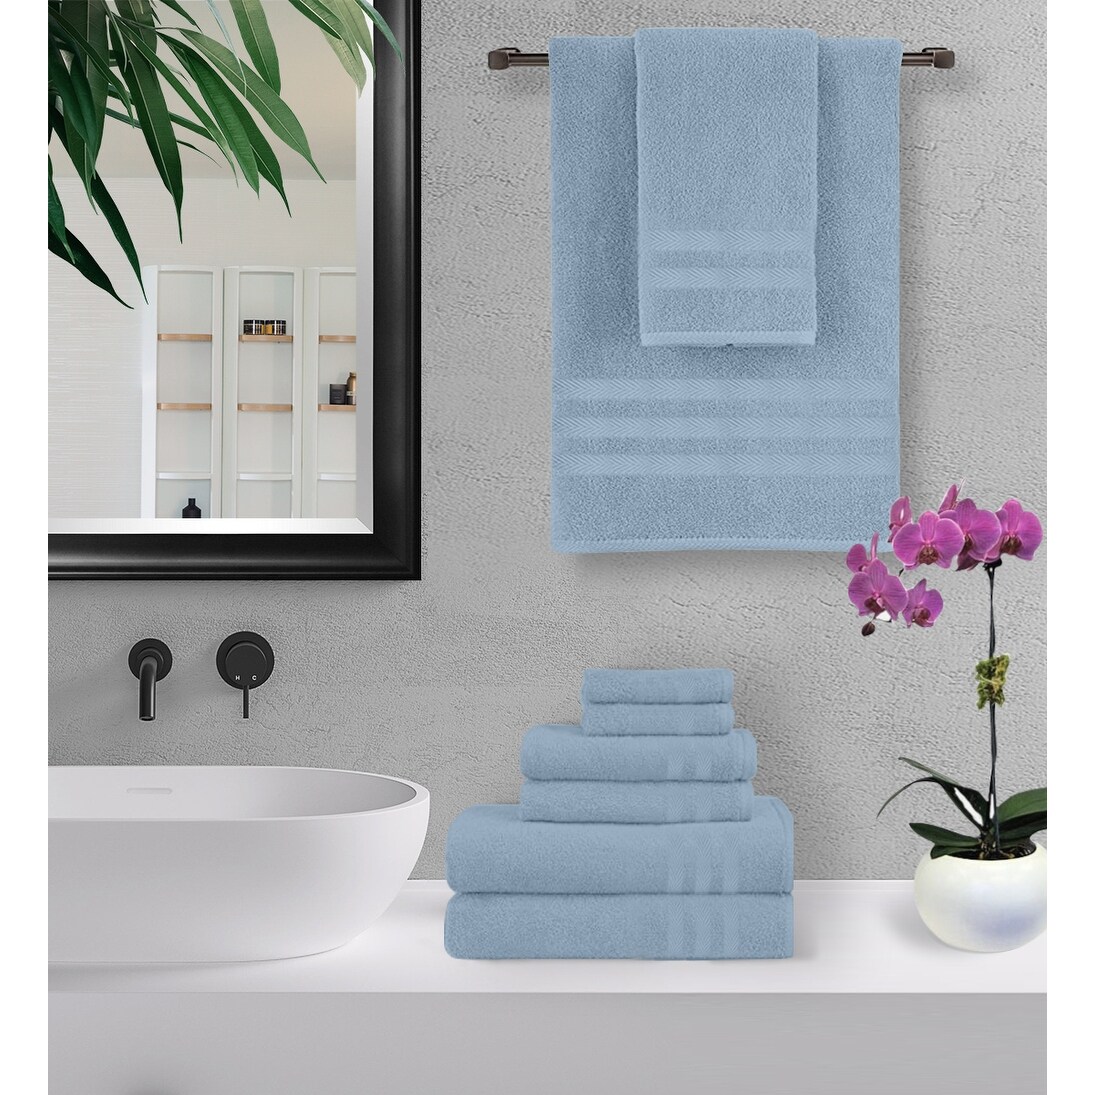 SUPERIOR 100% Cotton Towel Set, 6-Piece Set Includes 2 Bath Towels, 2 Hand  Towels, and 2 Washcloths, for Bathroom or Shower, Great for Face, Body